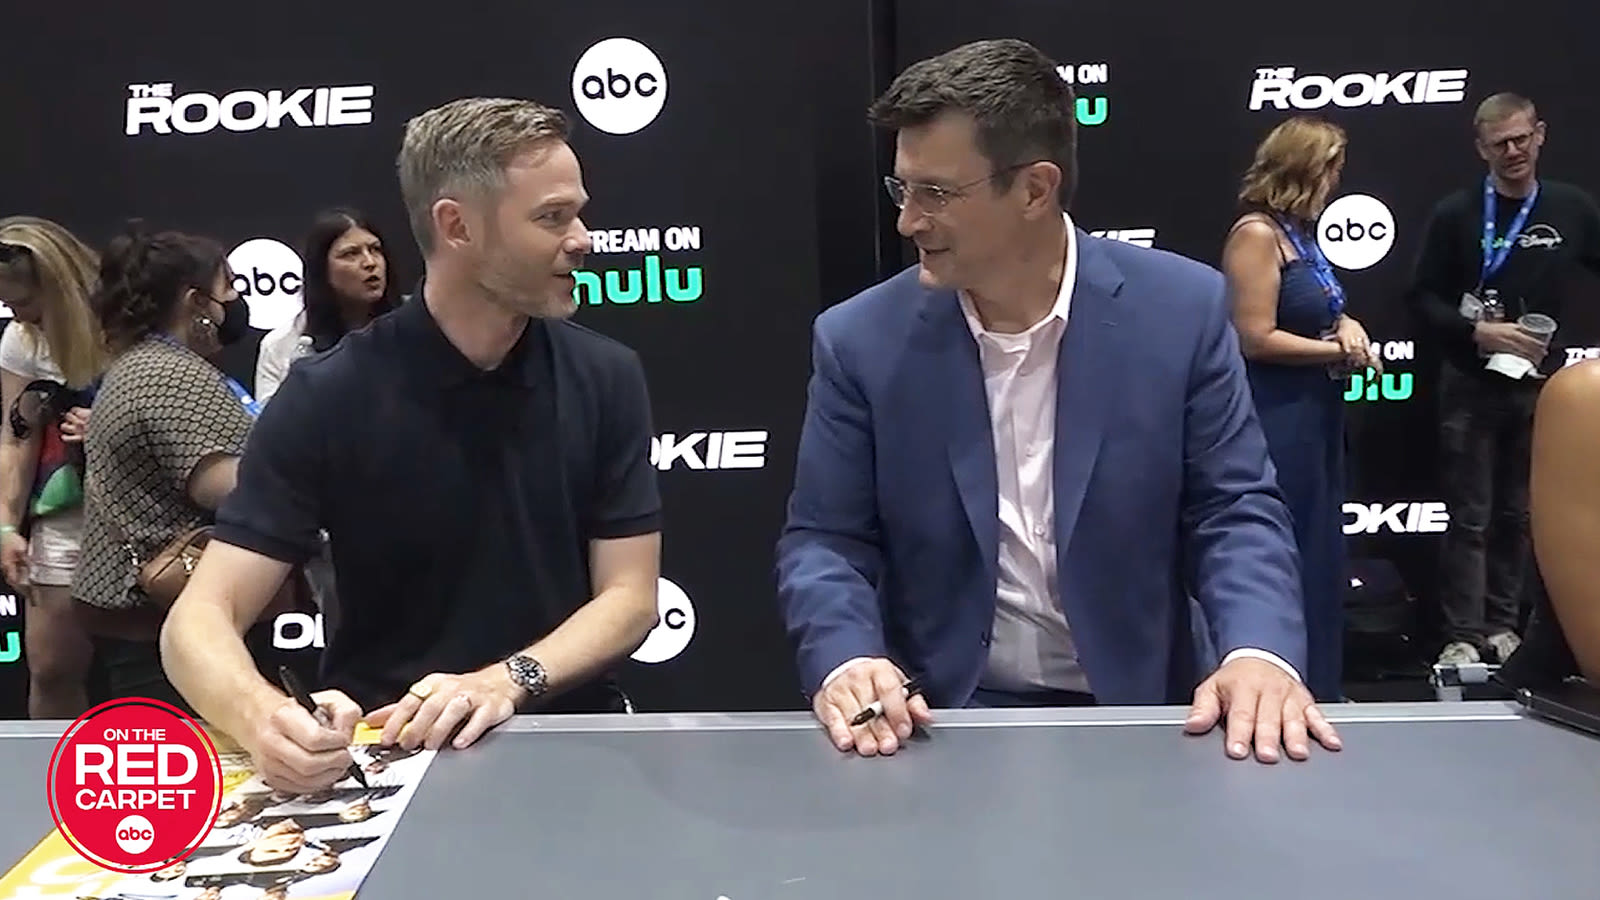 Nathan Fillion and Shawn Ashmore are no rookies when it comes to attending San Diego Comic Con